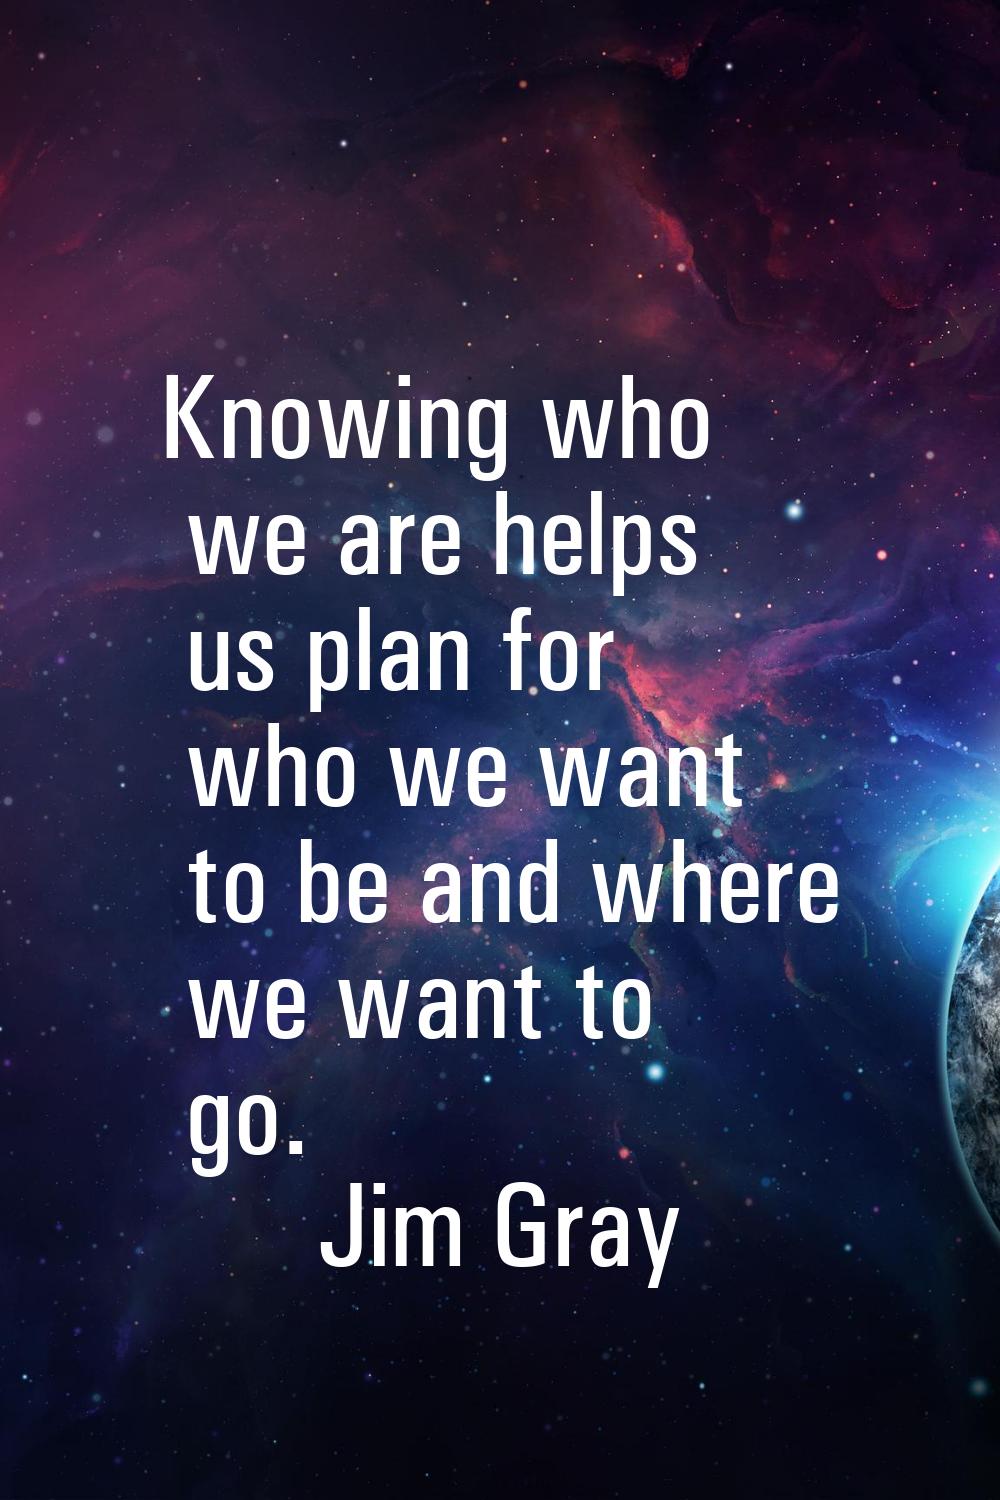 Knowing who we are helps us plan for who we want to be and where we want to go.